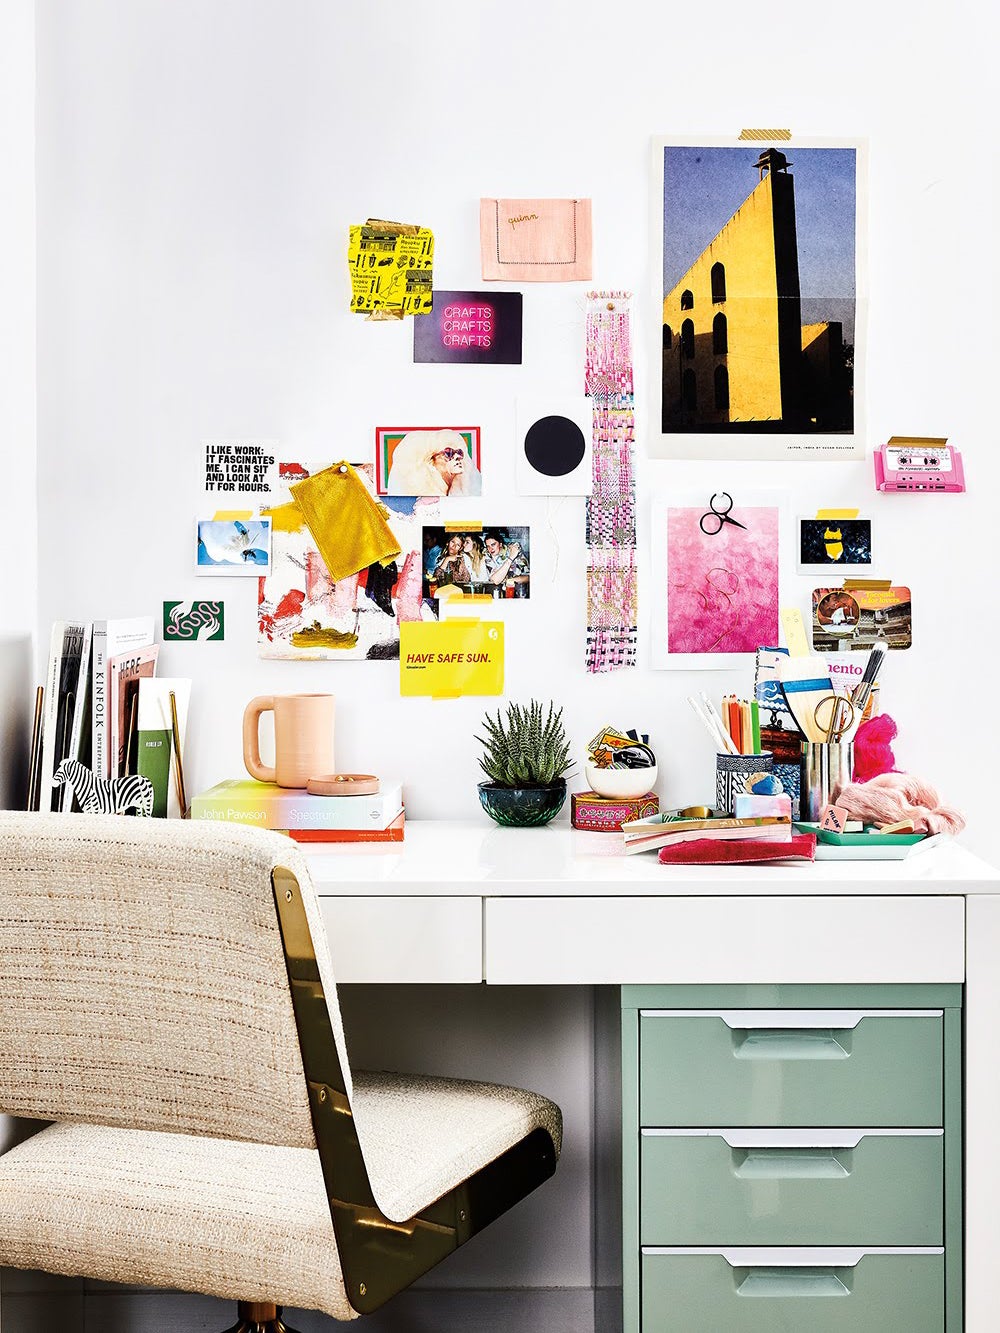 IKEA's Most Popular Back-to-School Product Is a Domino-Approved Storage Essential